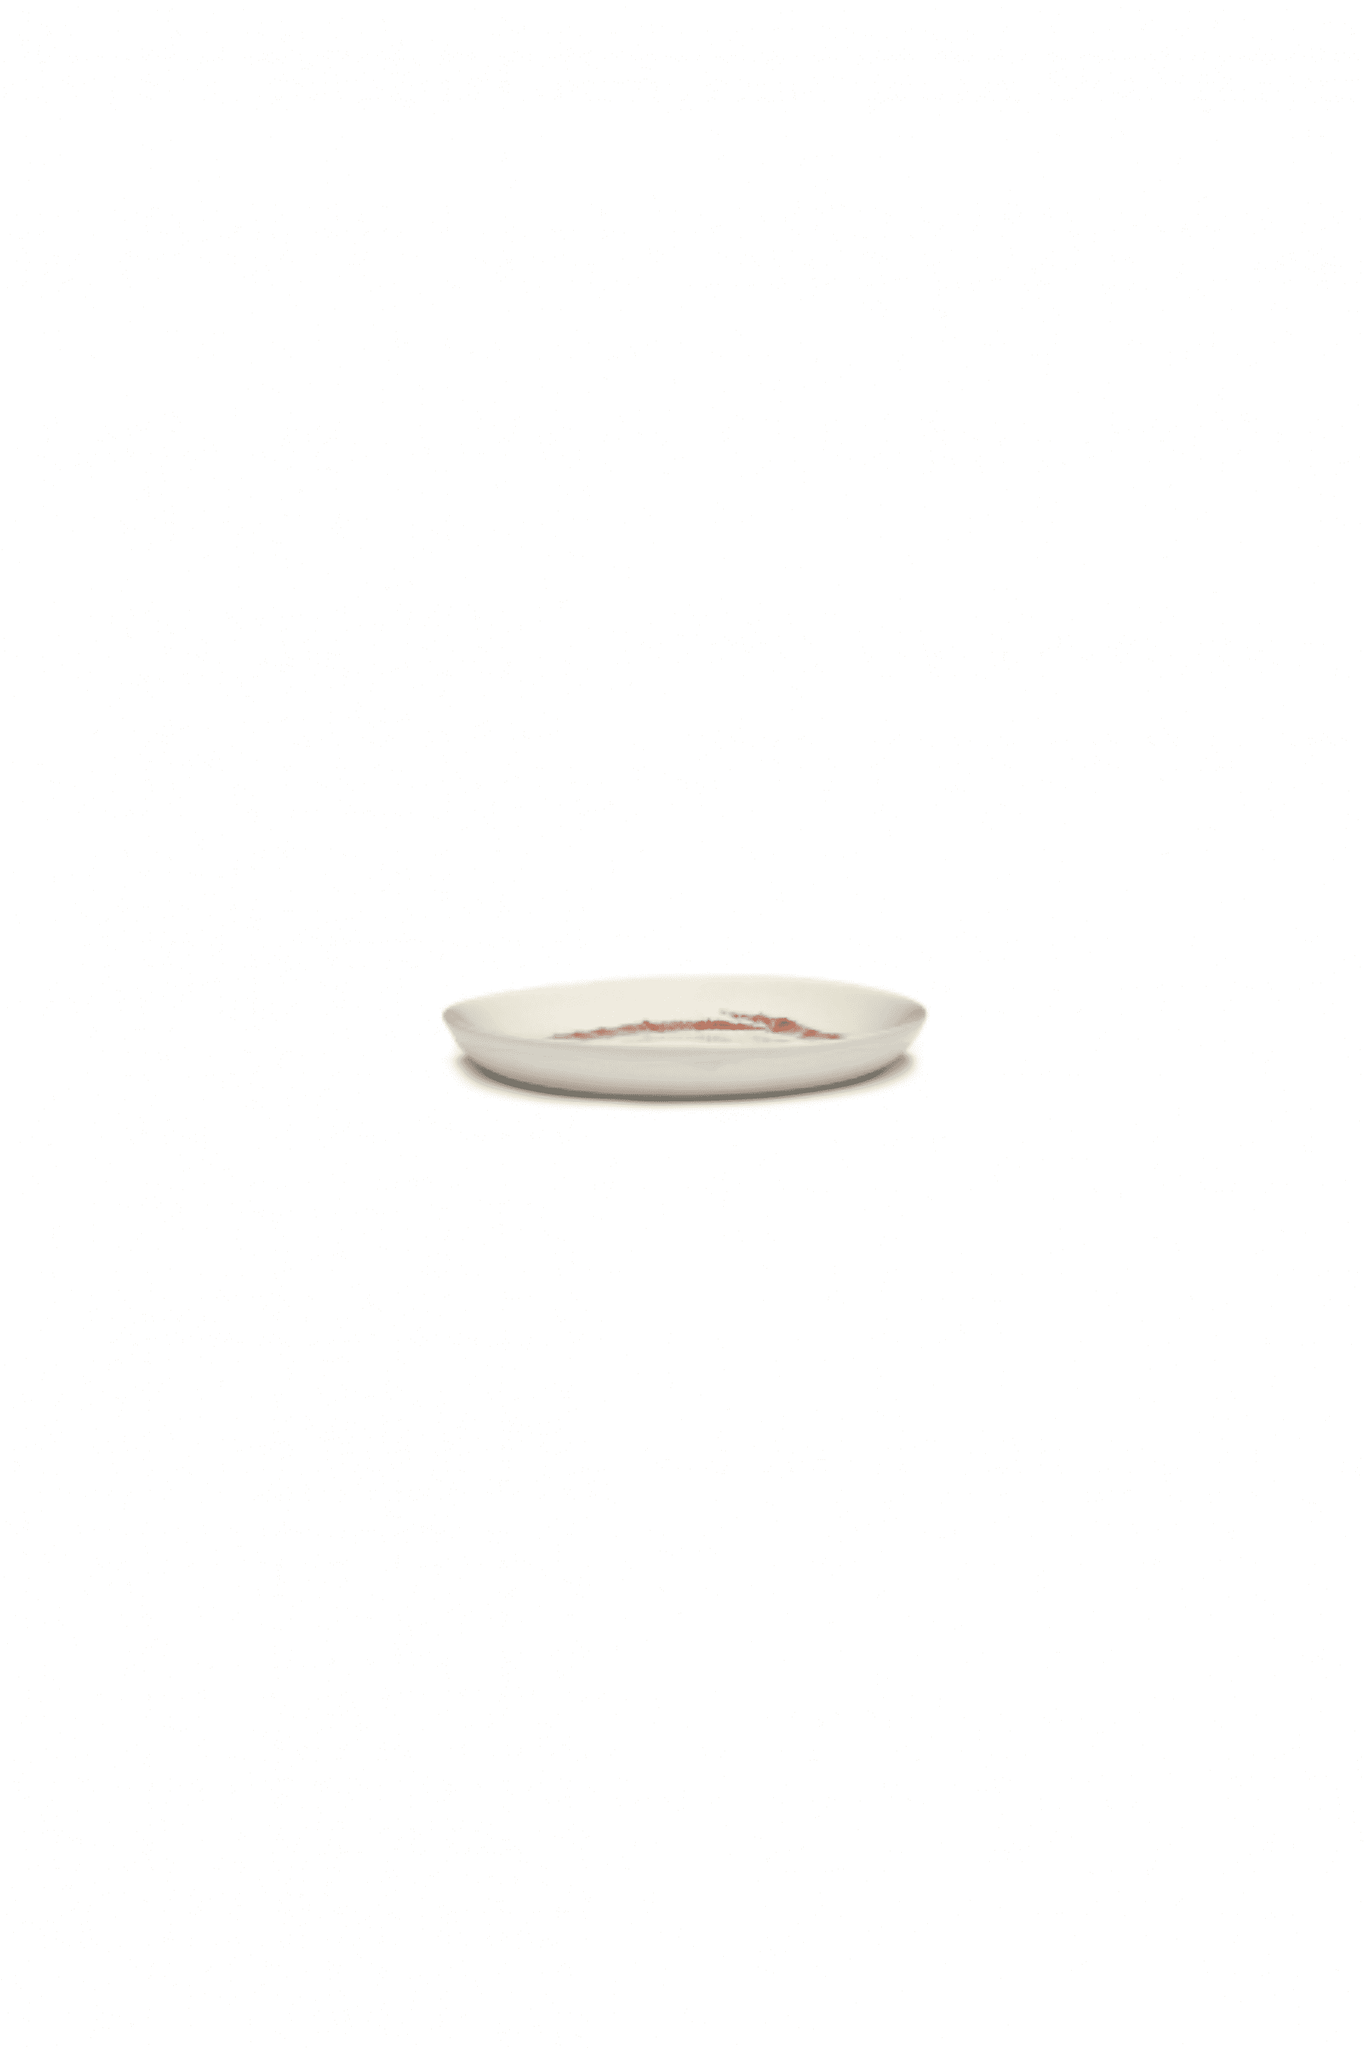 X-Small Plate, White Swirl with Red Stripes Ottolenghi Serax, side view